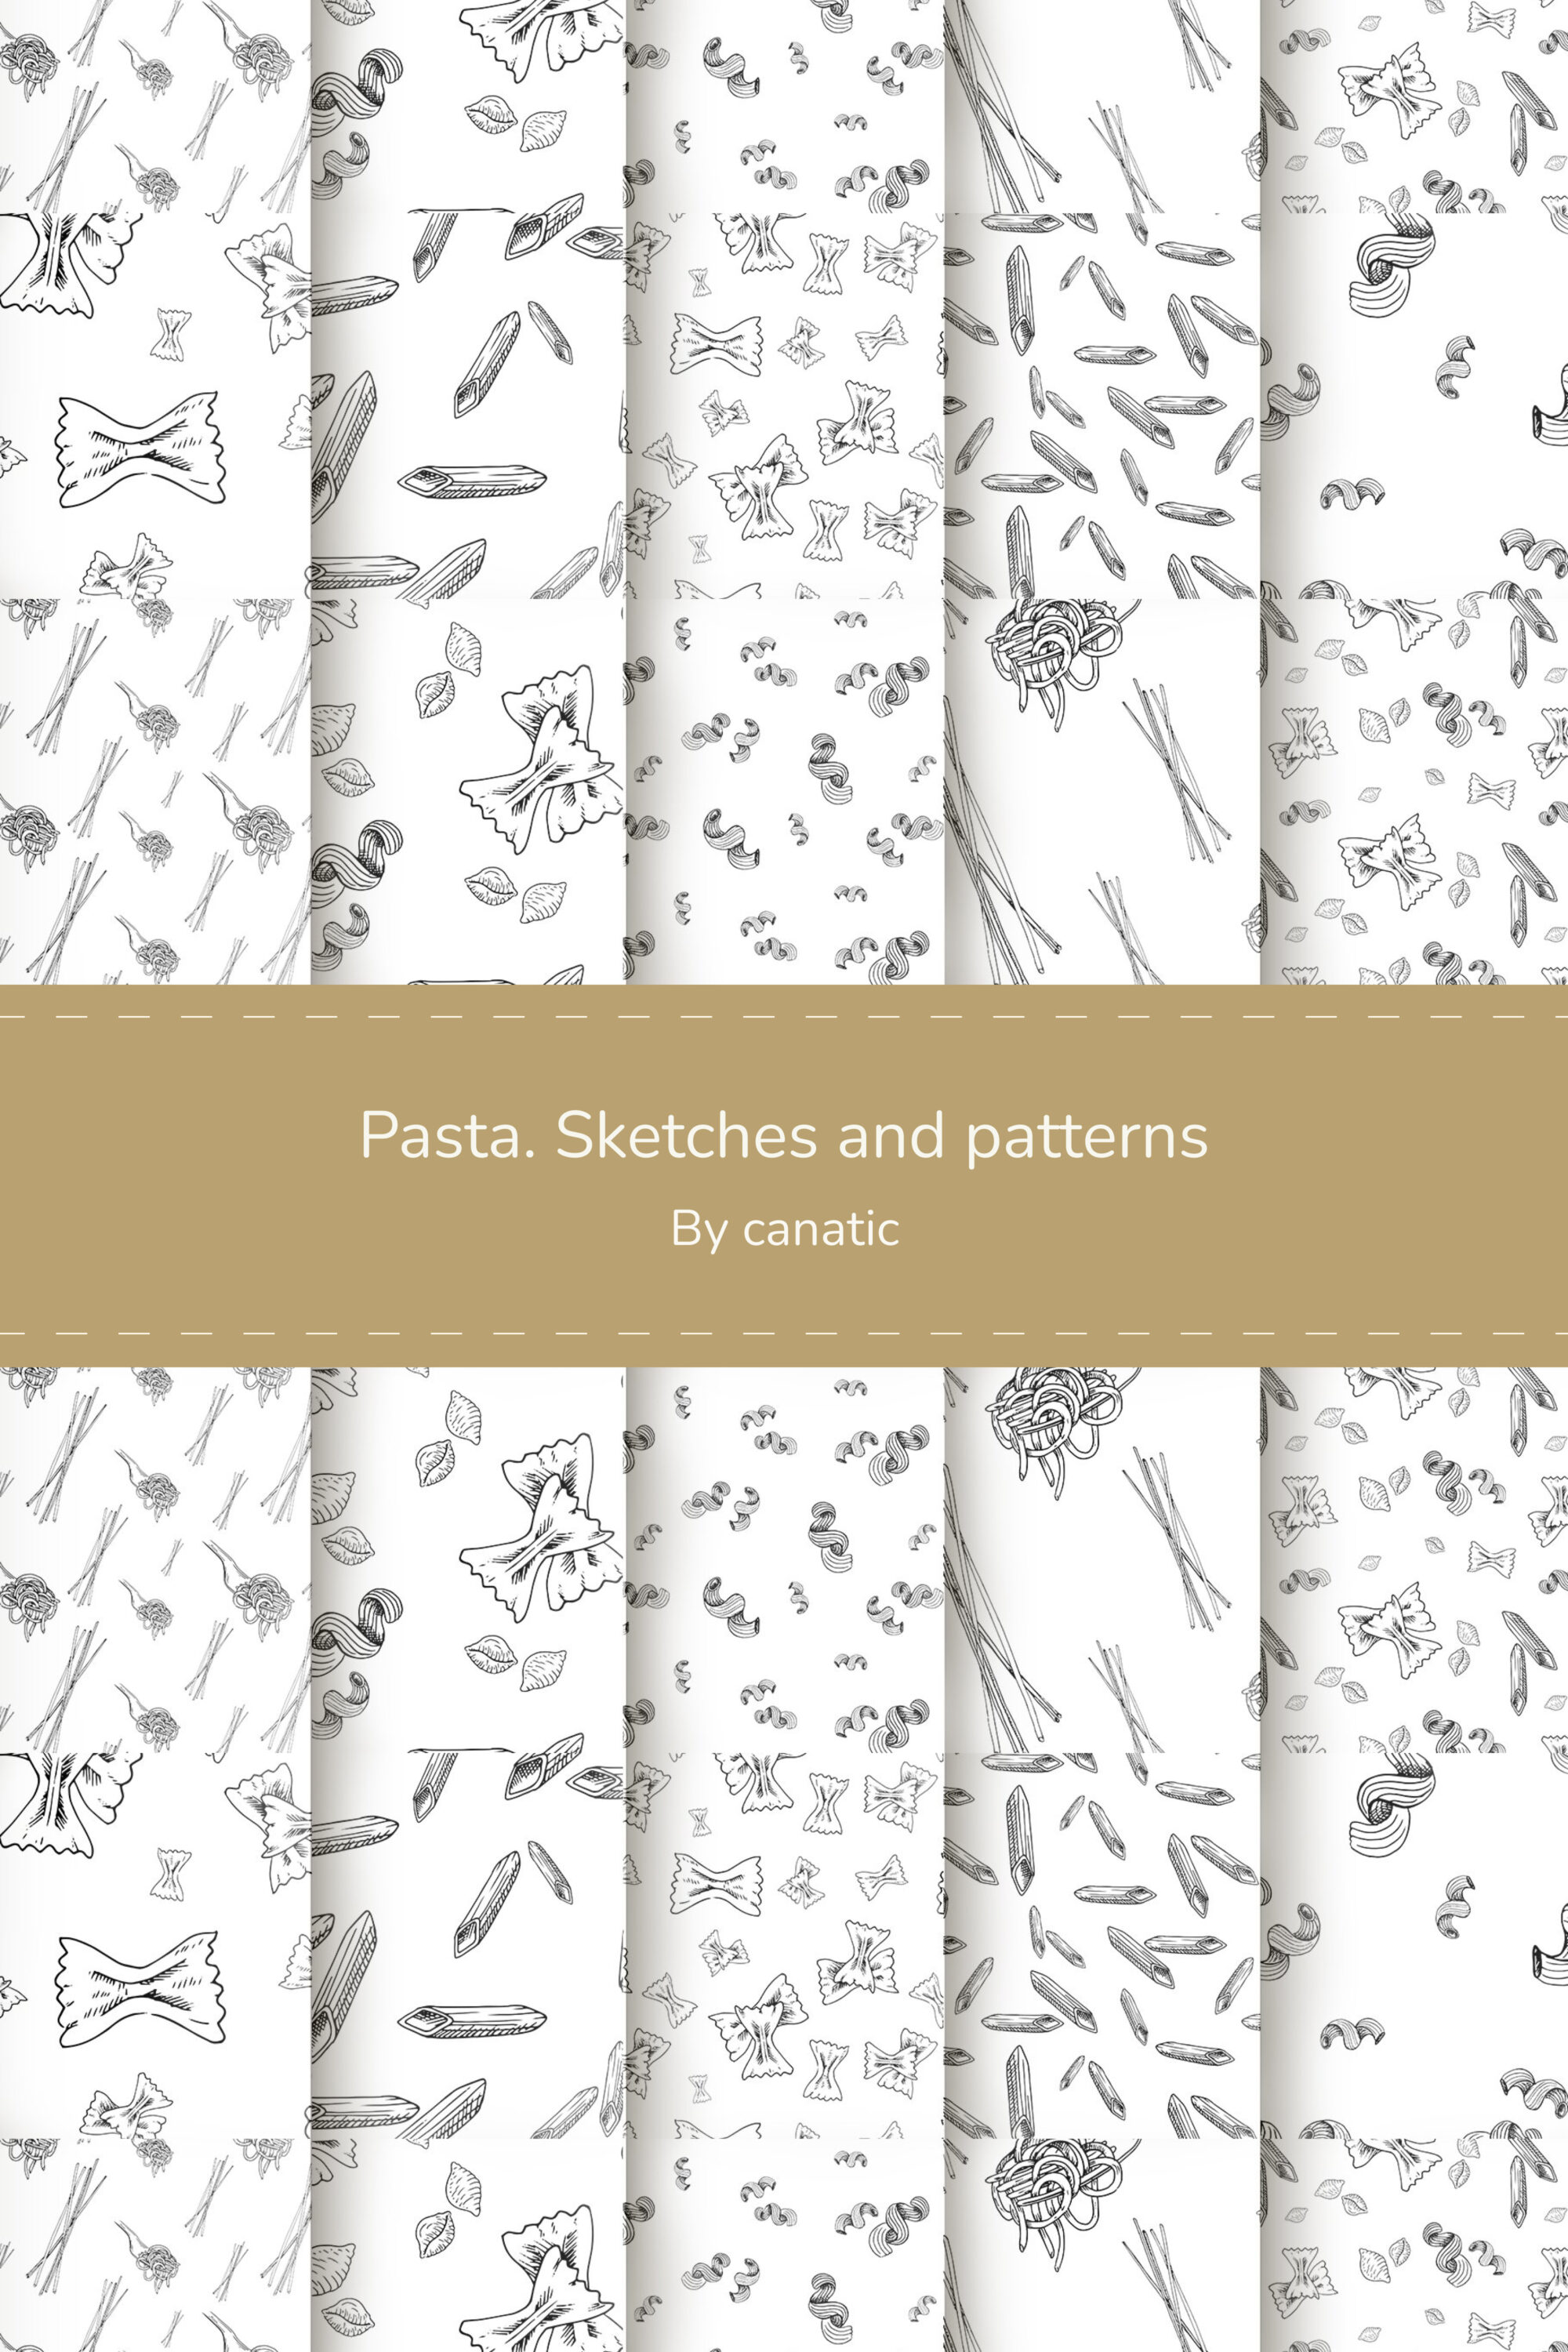 Pasta. sketches and patterns.